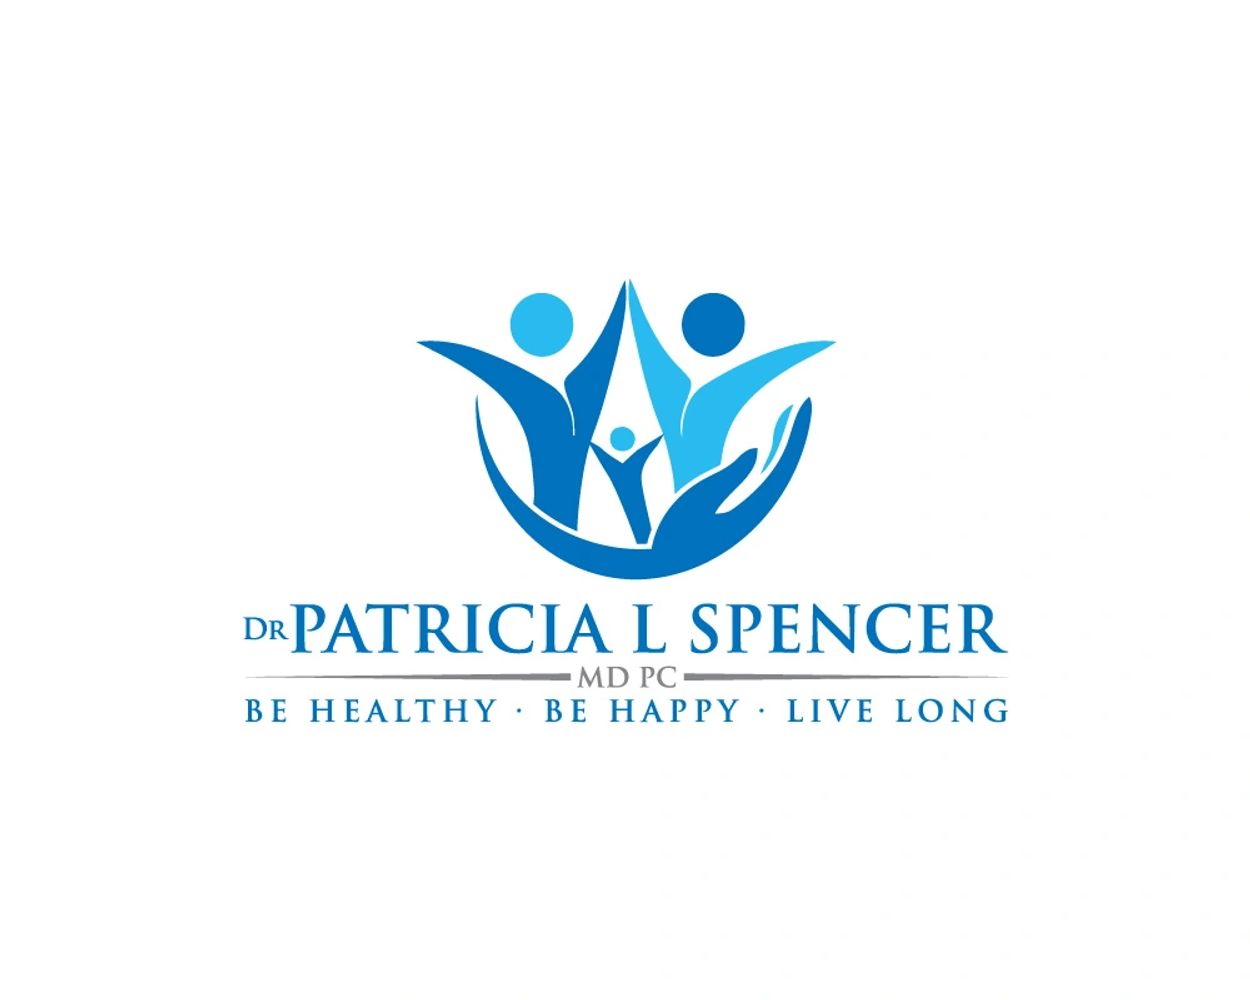 Logo of a family held by a hand.  Dr. Patricia L Spencer, MD PC, be healthy, be happy, live long